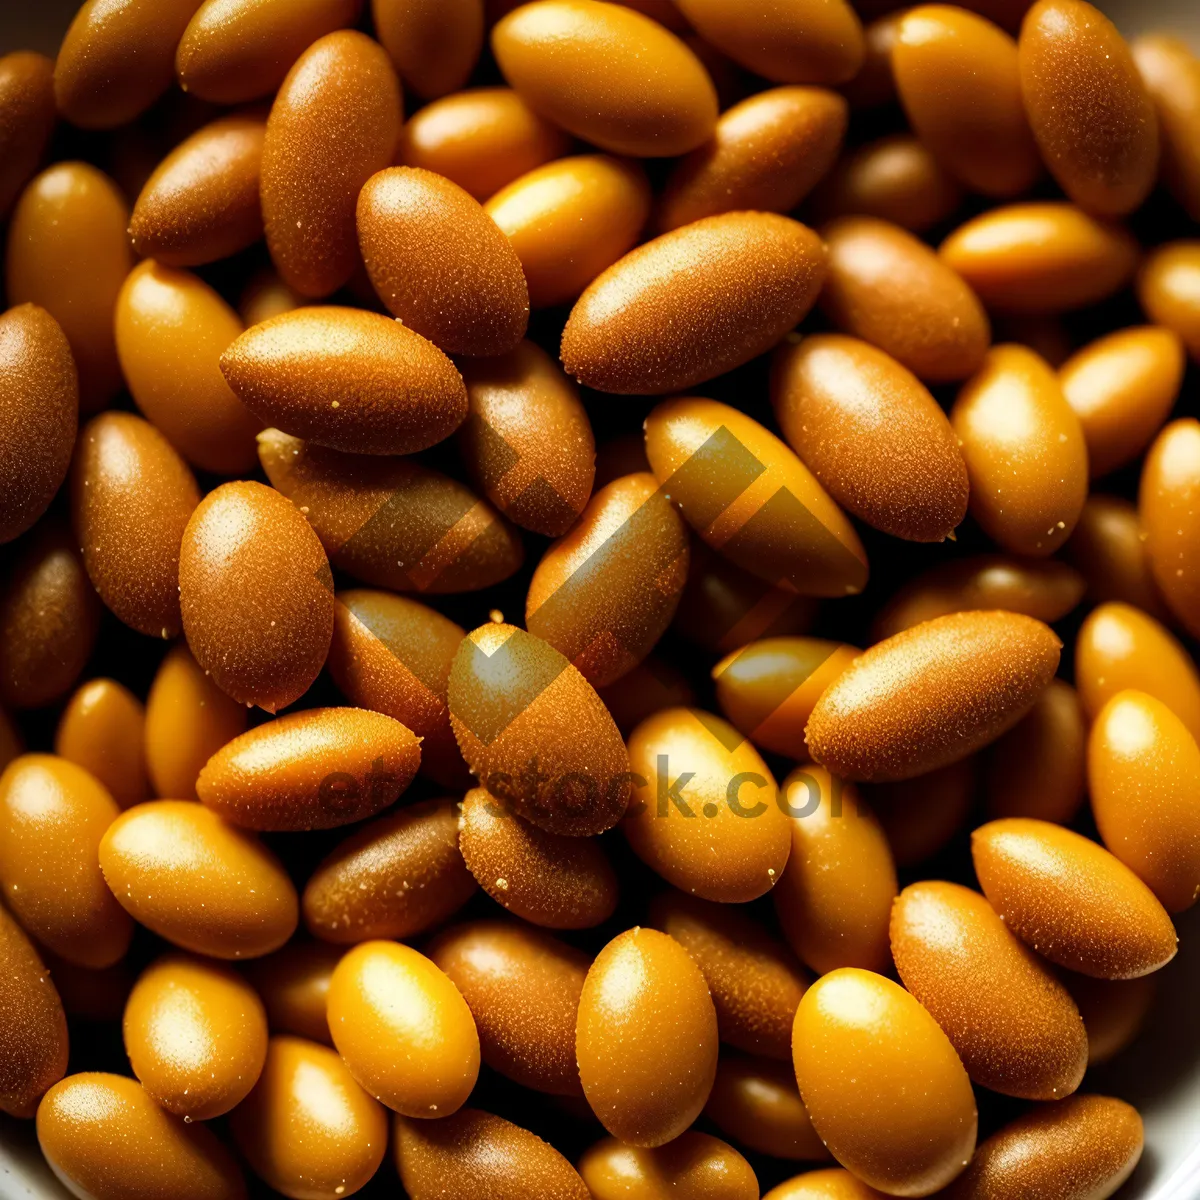 Picture of Nutrient-rich Legume Medley: Beans, Lentils, and Coffee